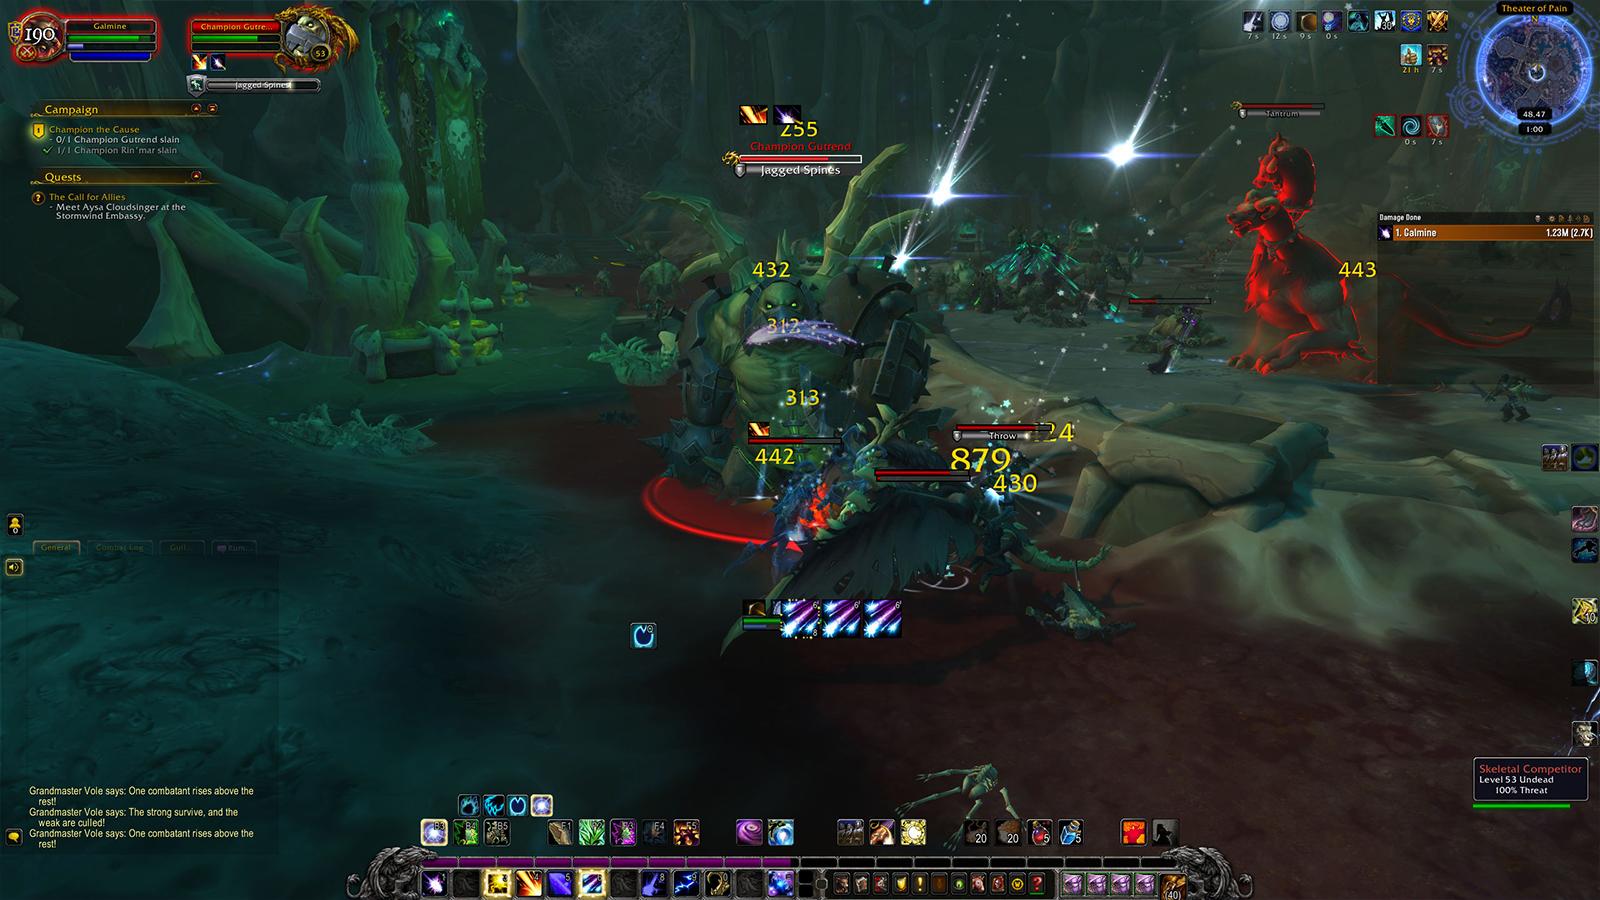 Theater of Pain in Maldraxxus, with lots of enemies on-screen at any one time